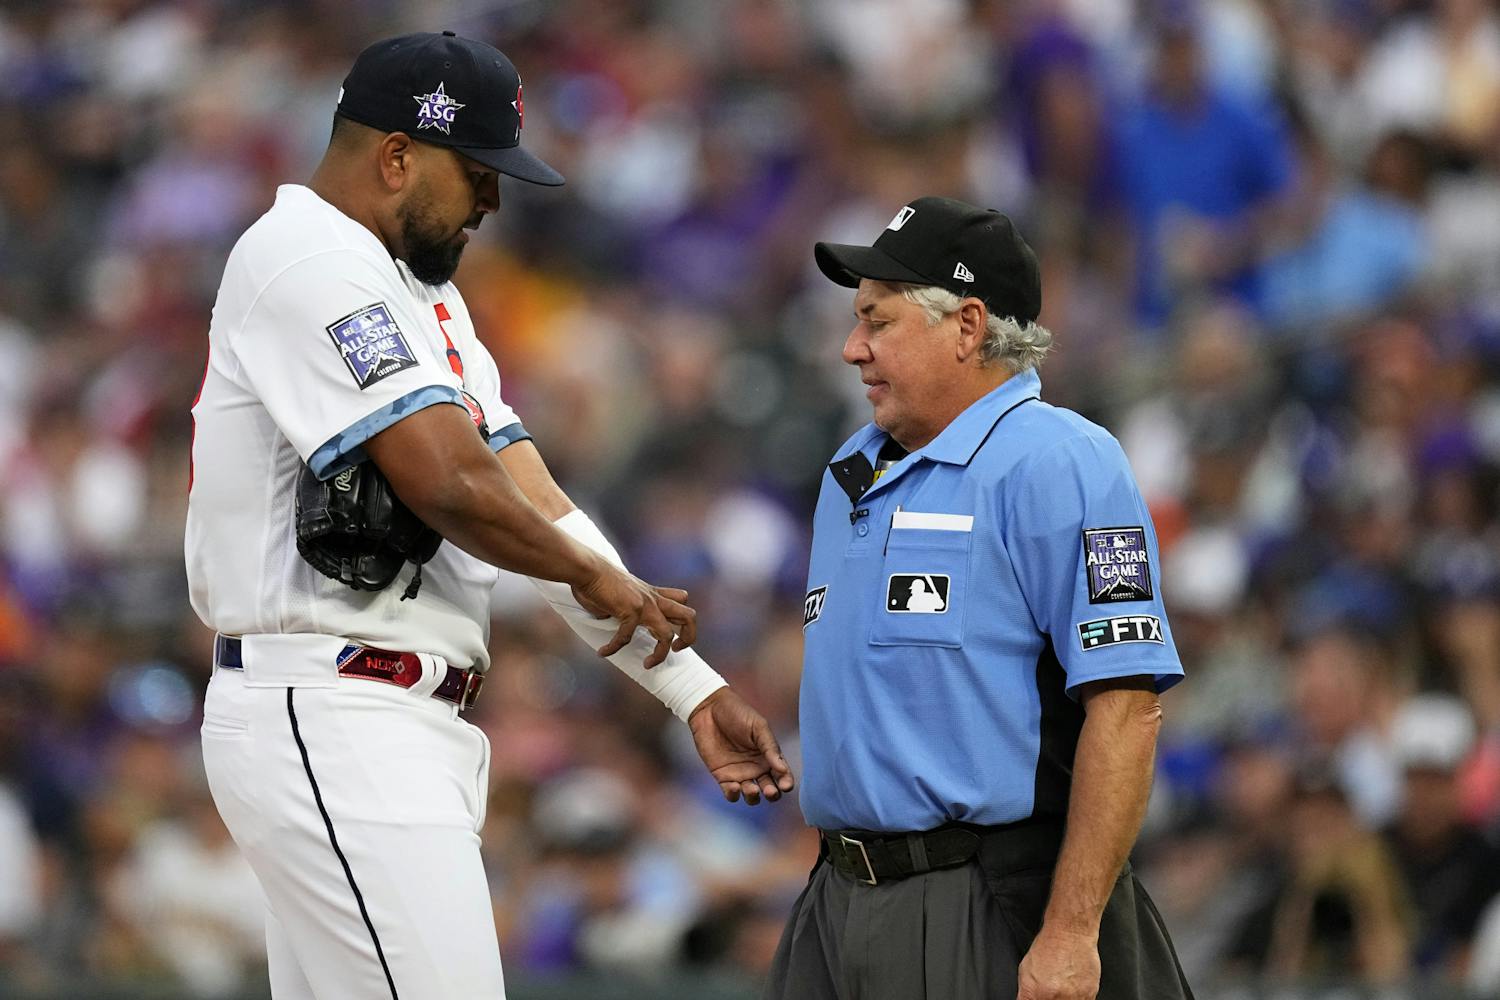 Home plate umpire Tom Hallion, right, checks for foreign substances on National League's German Marquez, of the Colorado Rockies, during the fourth inning of the MLB All-Star baseball game, Tuesday, July 13, 2021, in Denver. (AP Photo/Jack Dempsey)